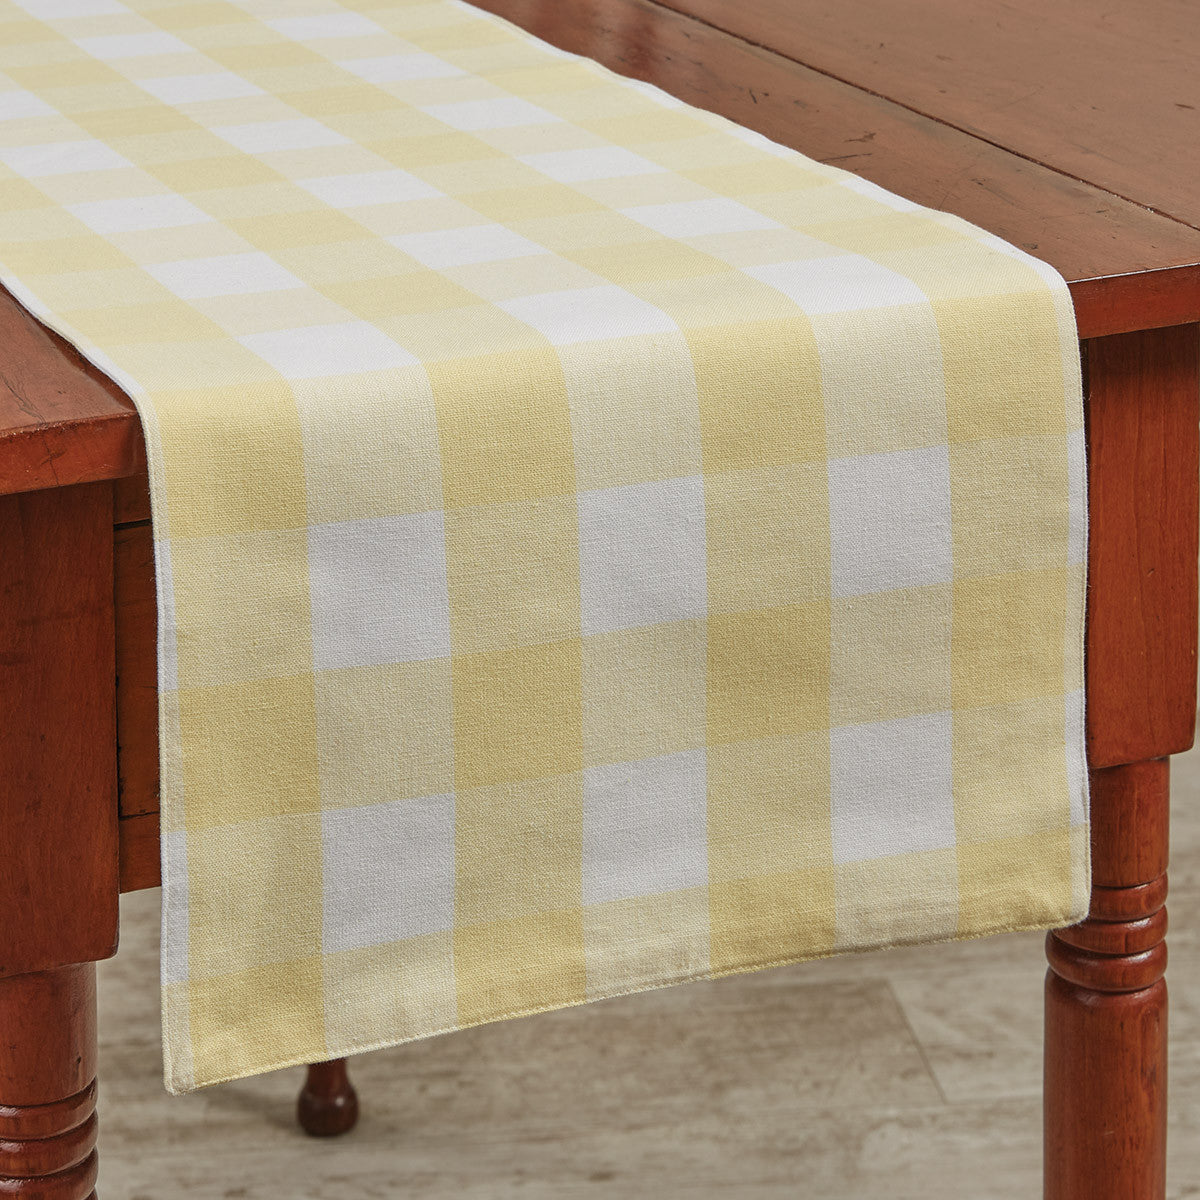 Wicklow Check Table Runners - Yellow Backed Park Designs